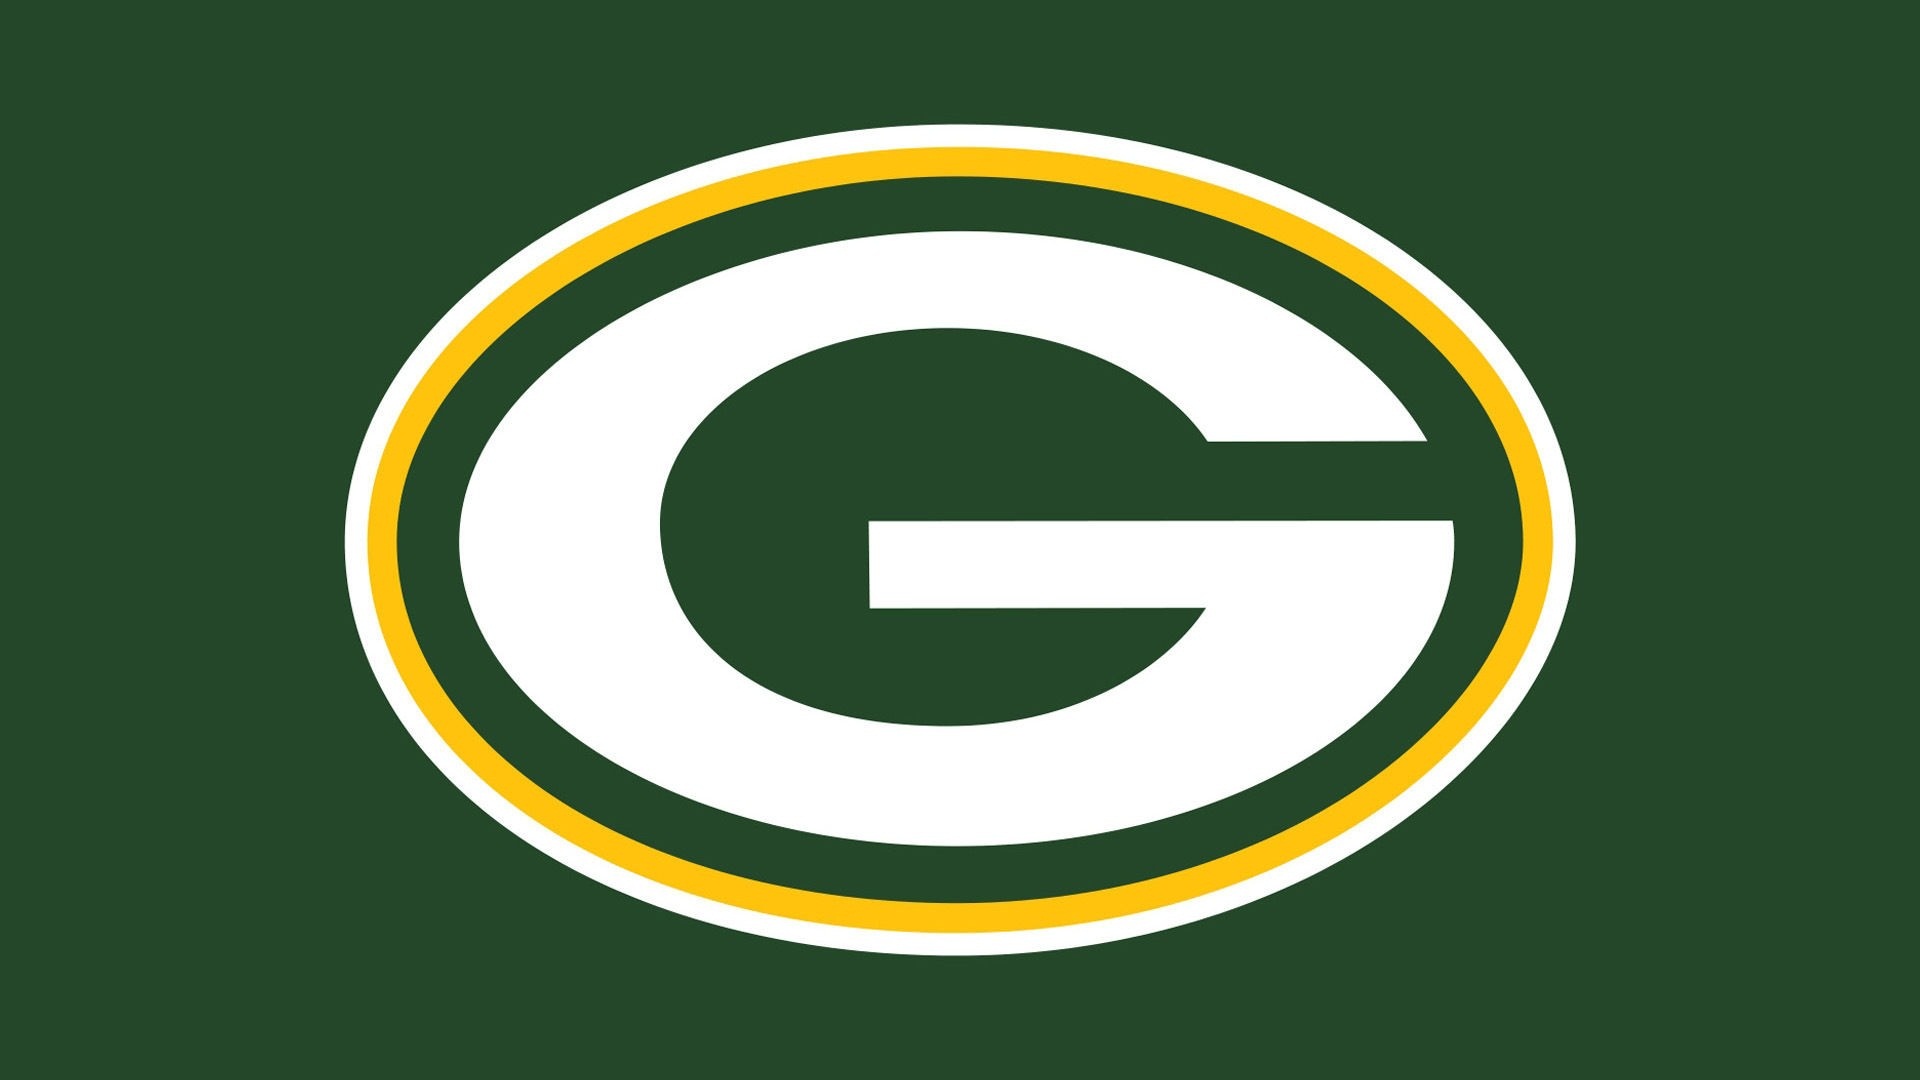 Wallpapers Green Bay Packers With Resolution 1920X1080